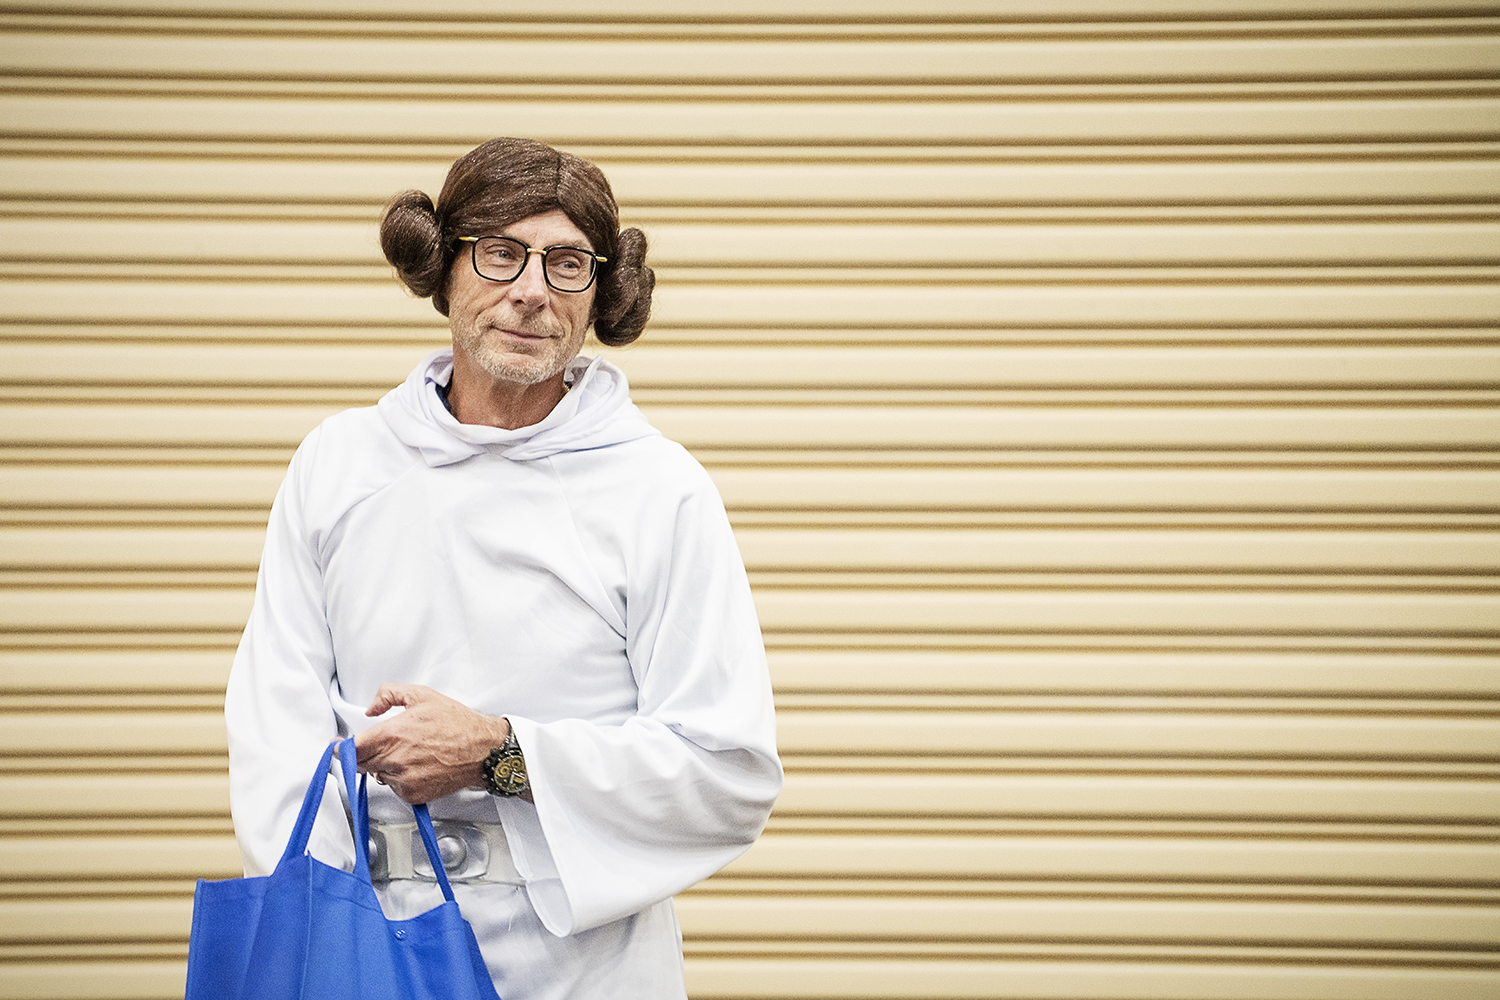 Flint, MI - Friday, May 4, 2018: Fenton Twp. Resident and Blueberry Founder Phil Shaltz, 69, looks across the crowd of Blueberry Ambassadors while dressed as Princess Leia from Star Wars before handing out blueberry-replica stress balls during the 5t